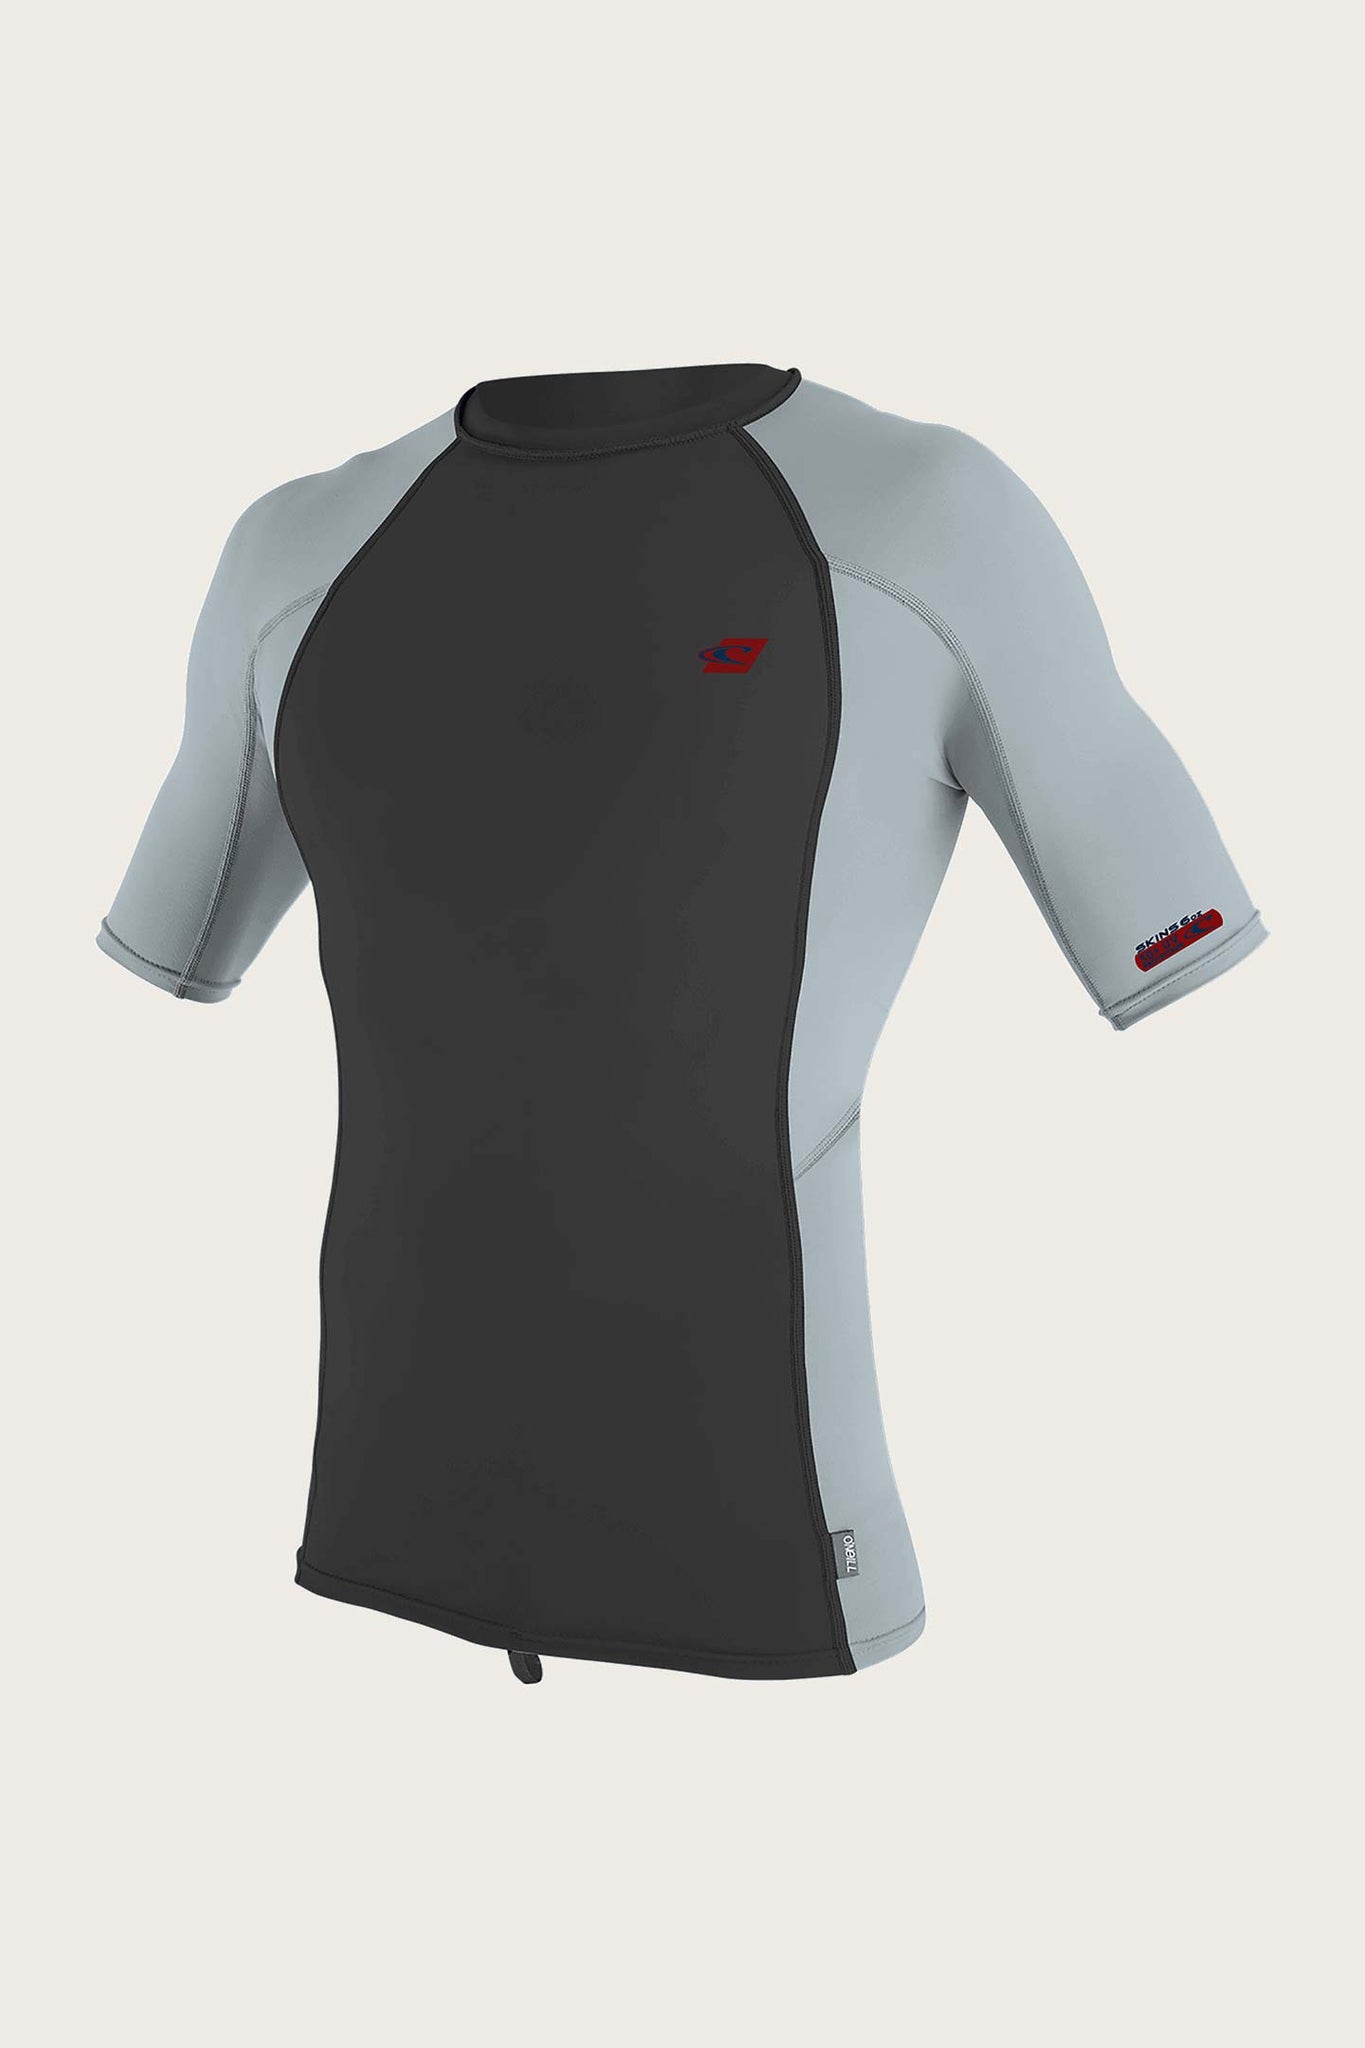 Premium Skins S/S Rash Guard - Raven/Coolgry/Coolgry | O'Neill